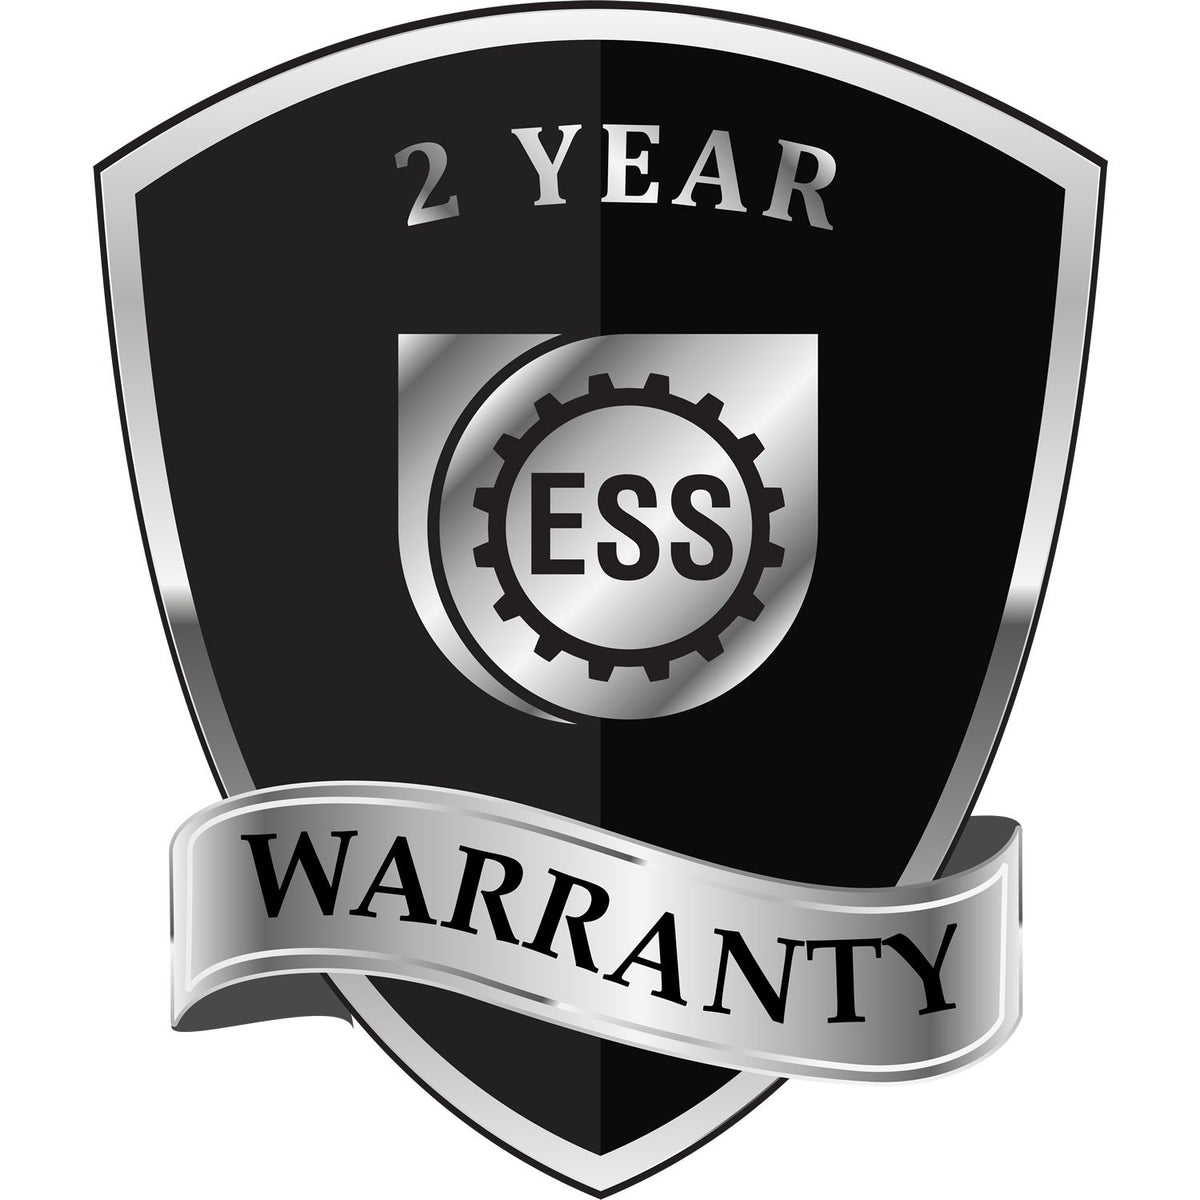 A black and silver badge or emblem showing warranty information for the Gift Texas Geologist Seal